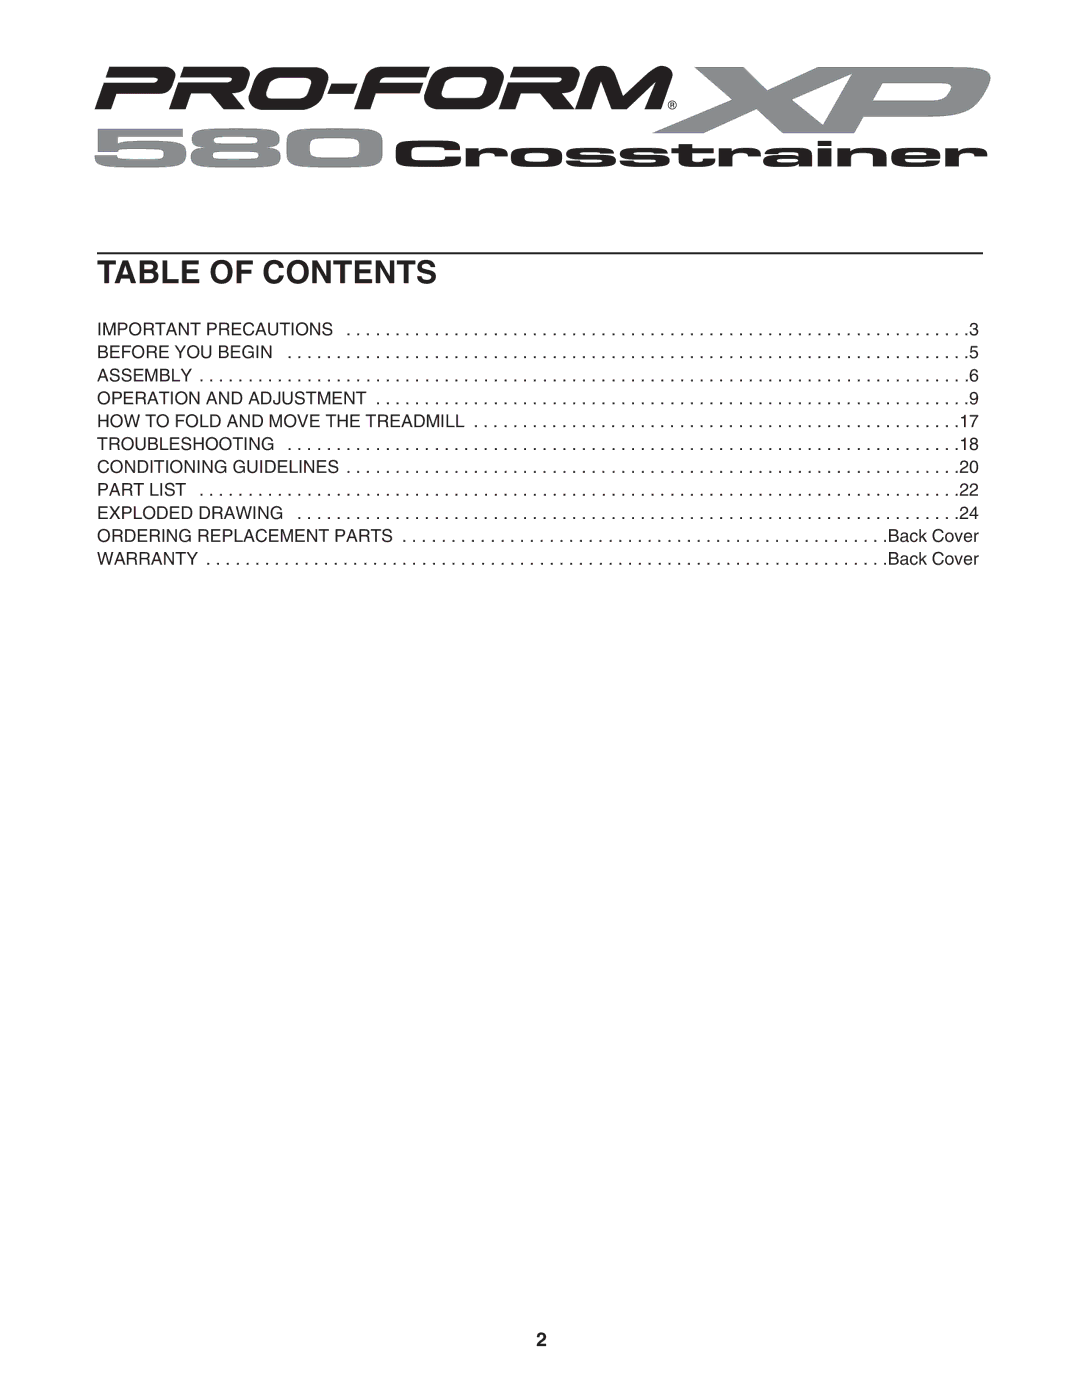 ProForm 831.24645.0 user manual Table of Contents 